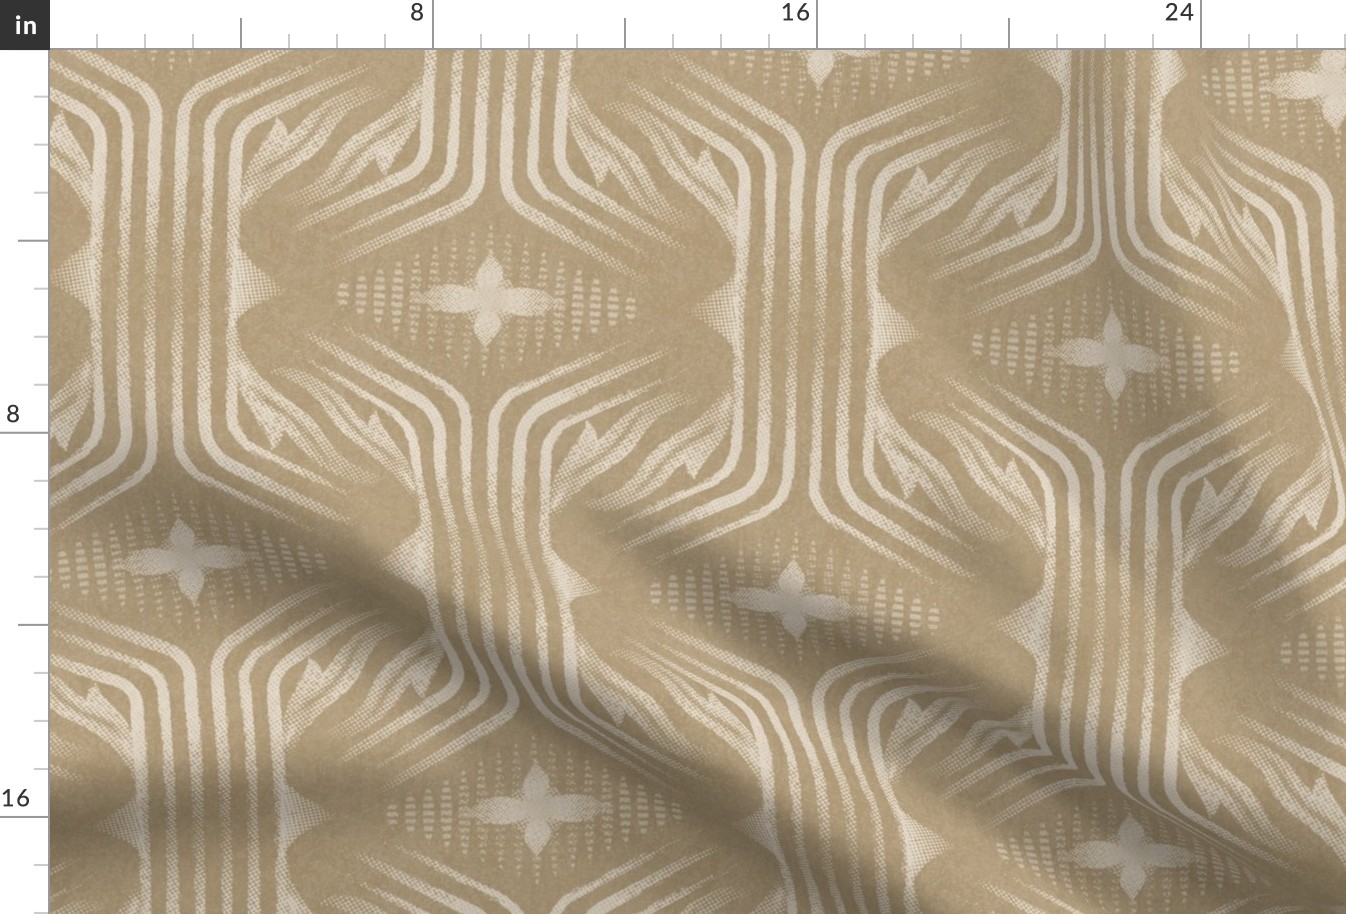 Interweaving lines textured elegant geometric with hexagons and diamonds - soft warm golden tan, muted mustard, taupe - extra large